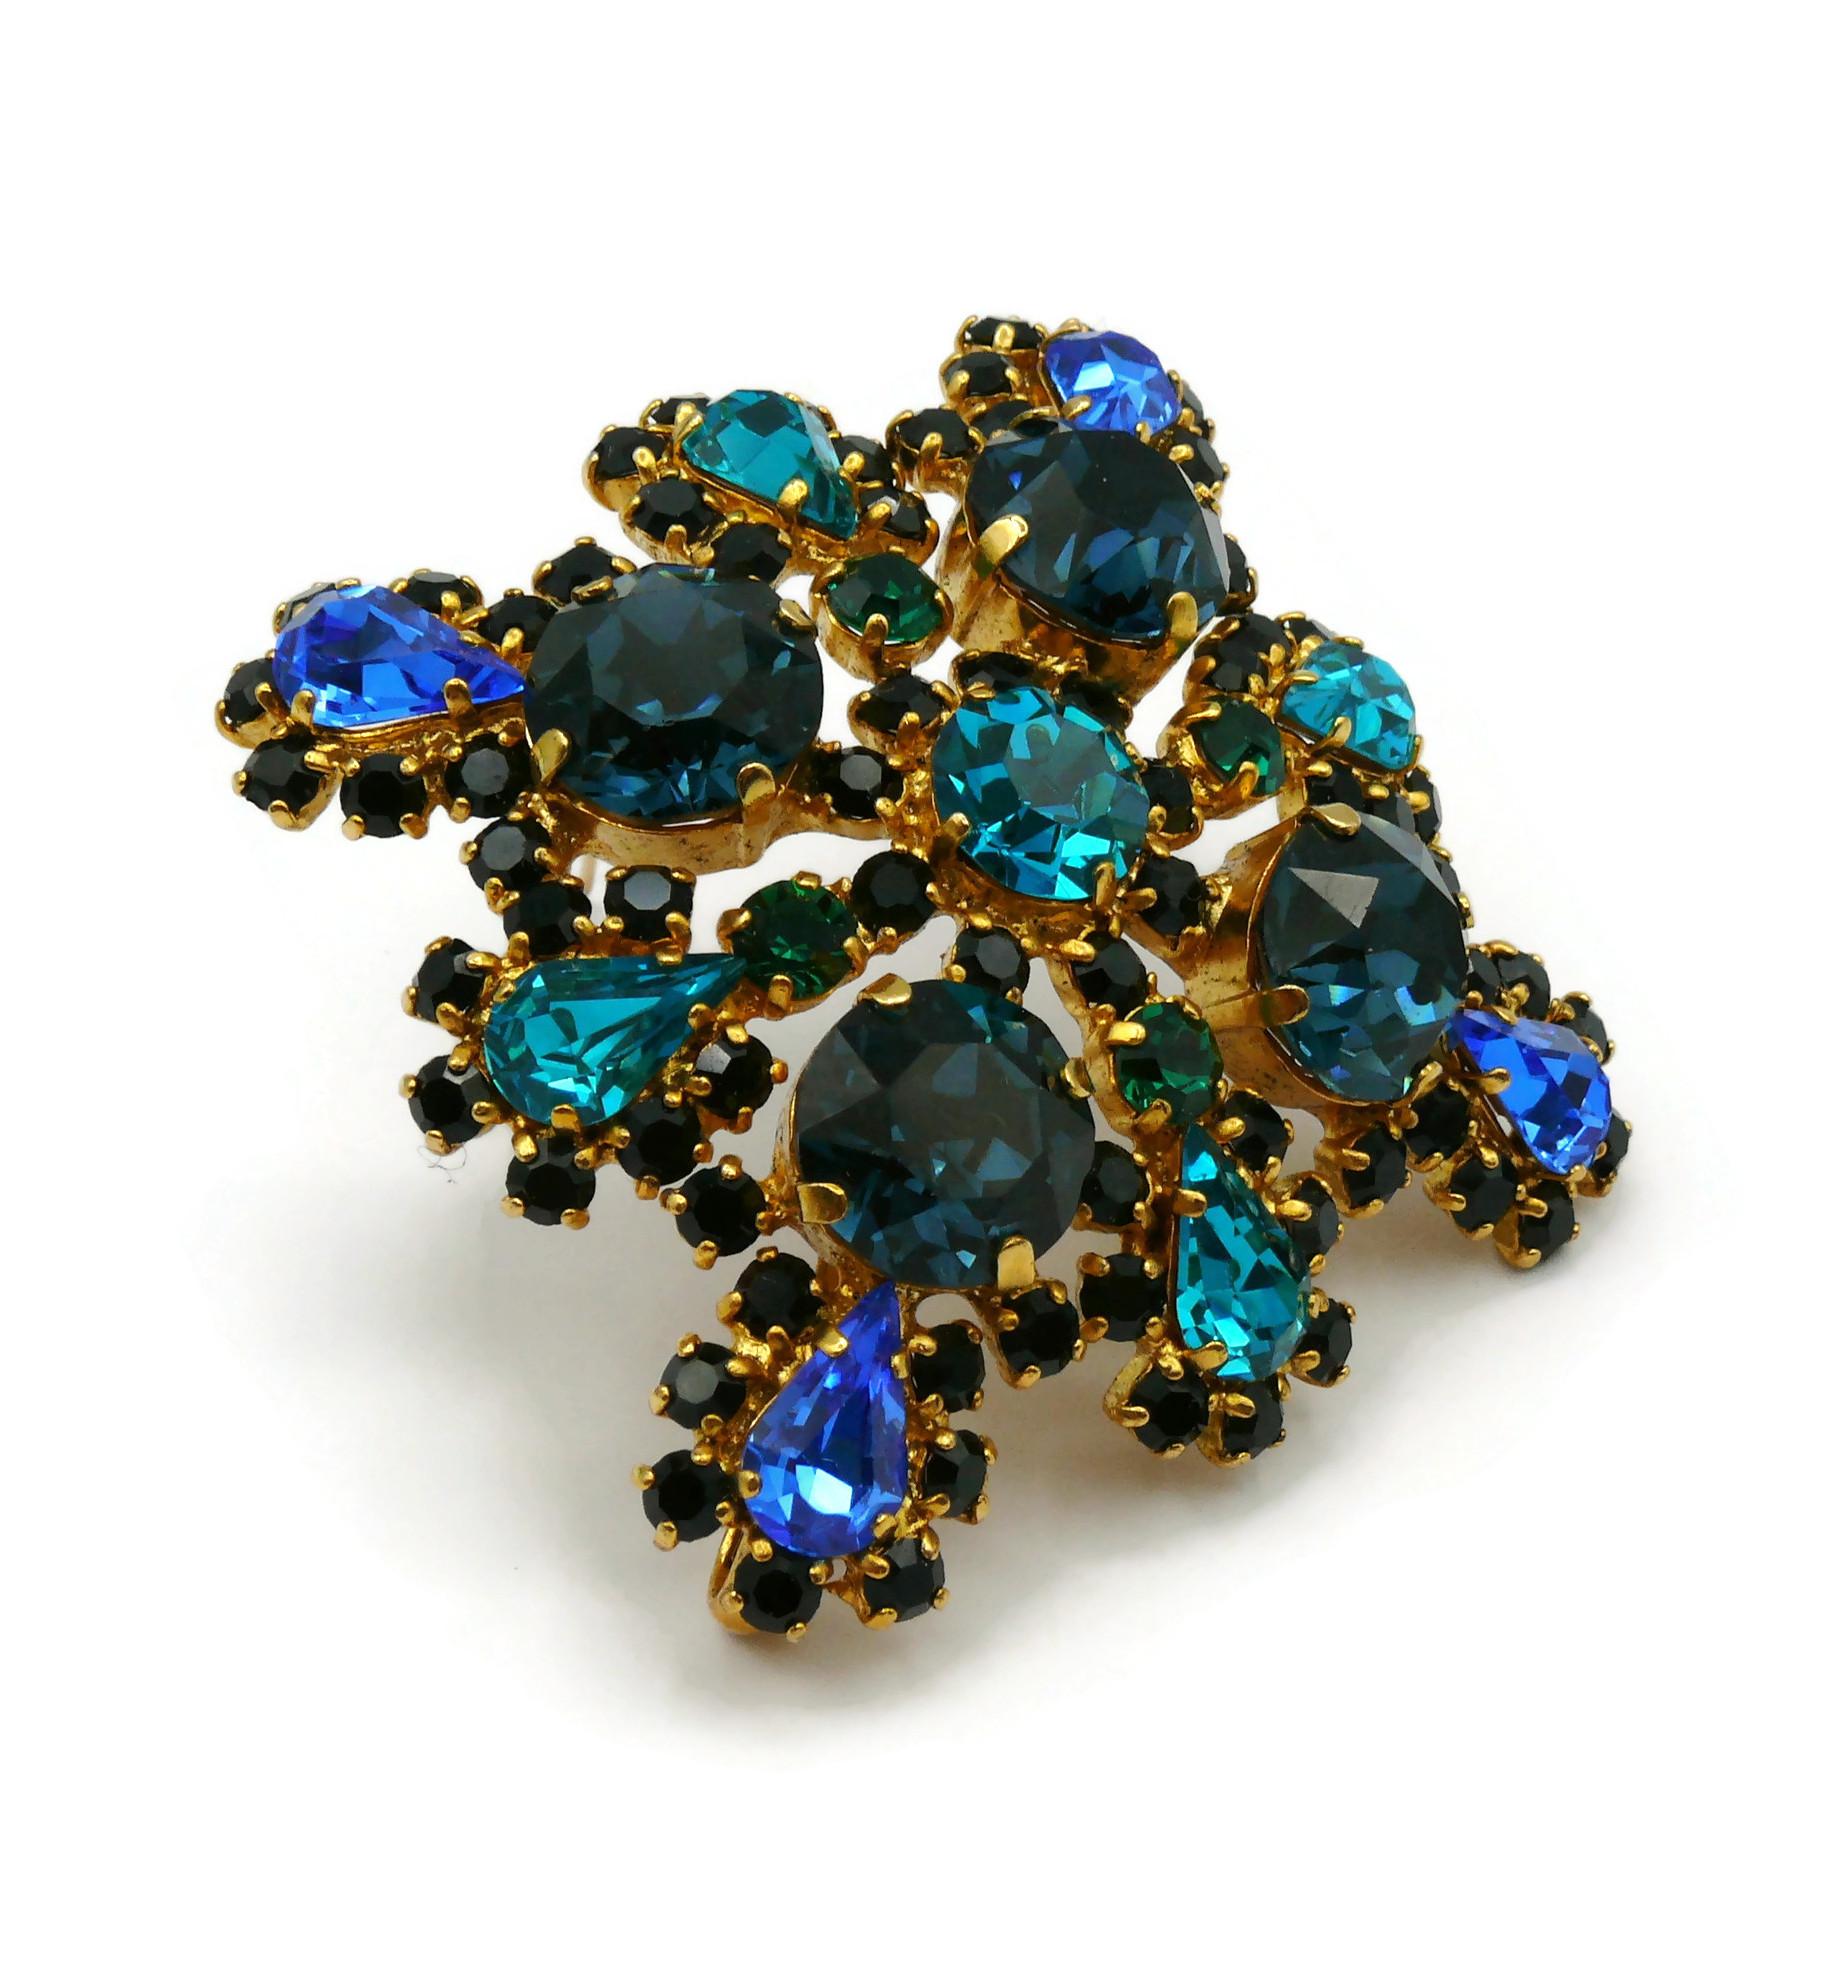 Women's CHRISTIAN DIOR by GIANFRANCO FERRE Vintage Massive Jewelled Brooch Pendant For Sale